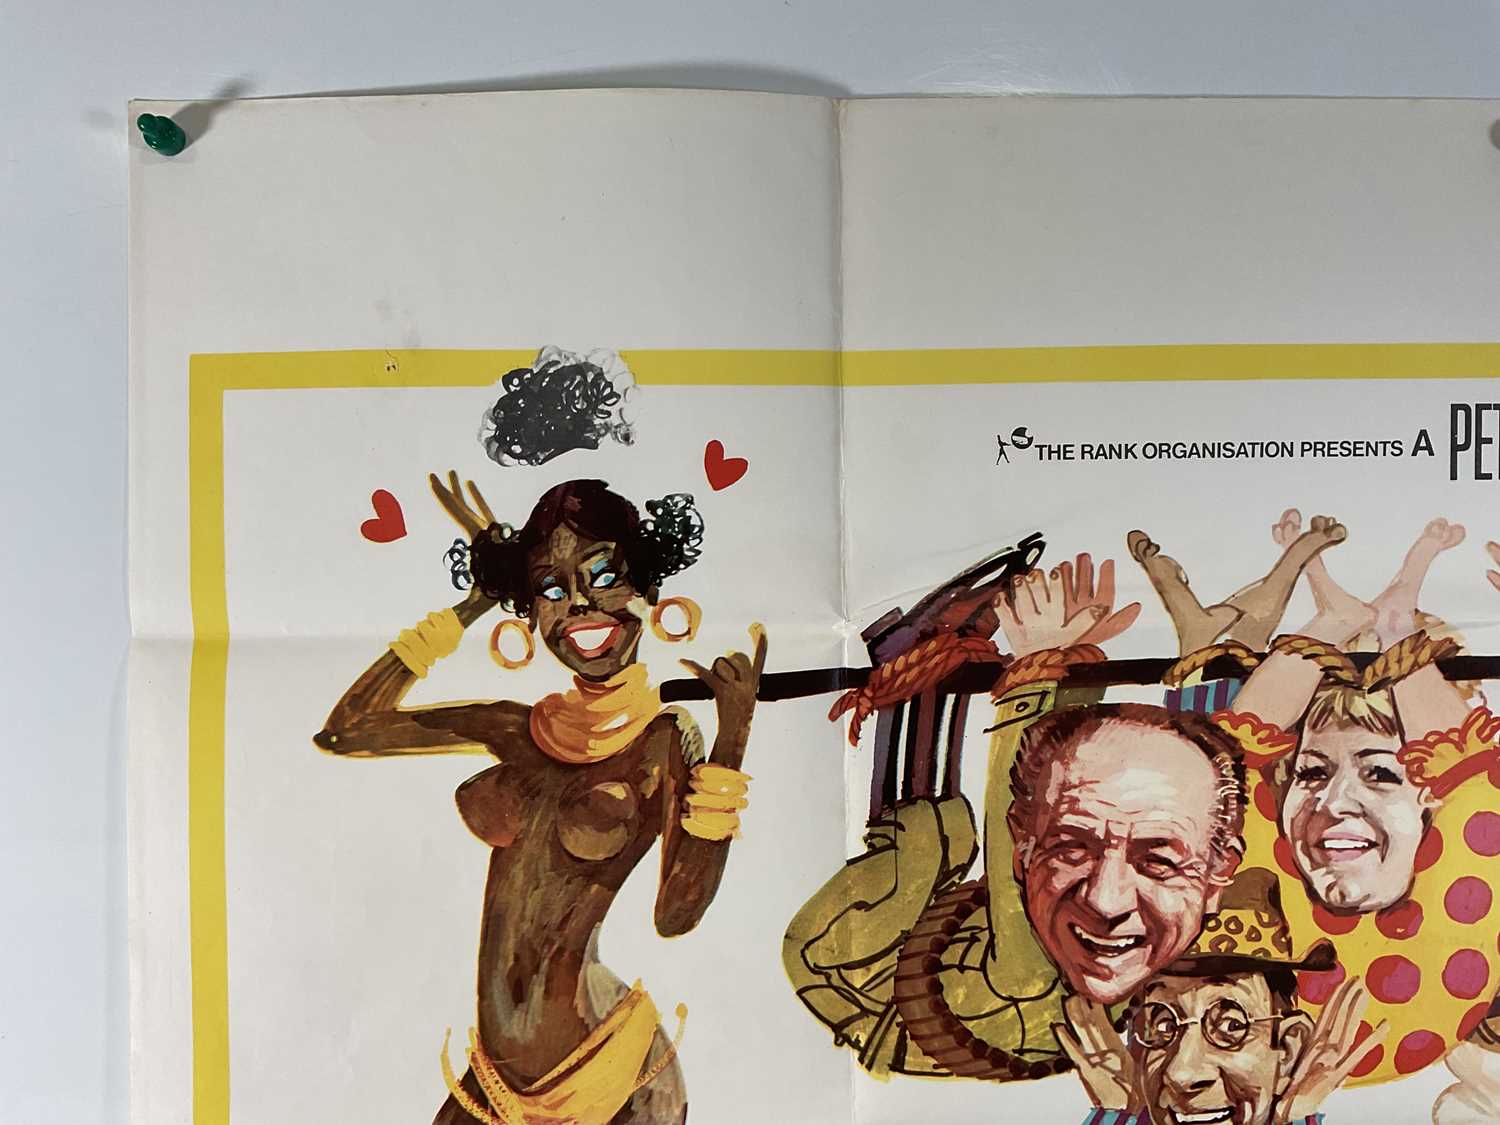 CARRY ON UP THE JUNGLE (1970) UK Quad film poster featuring Renato Fratini artwork, folded. - Image 3 of 6